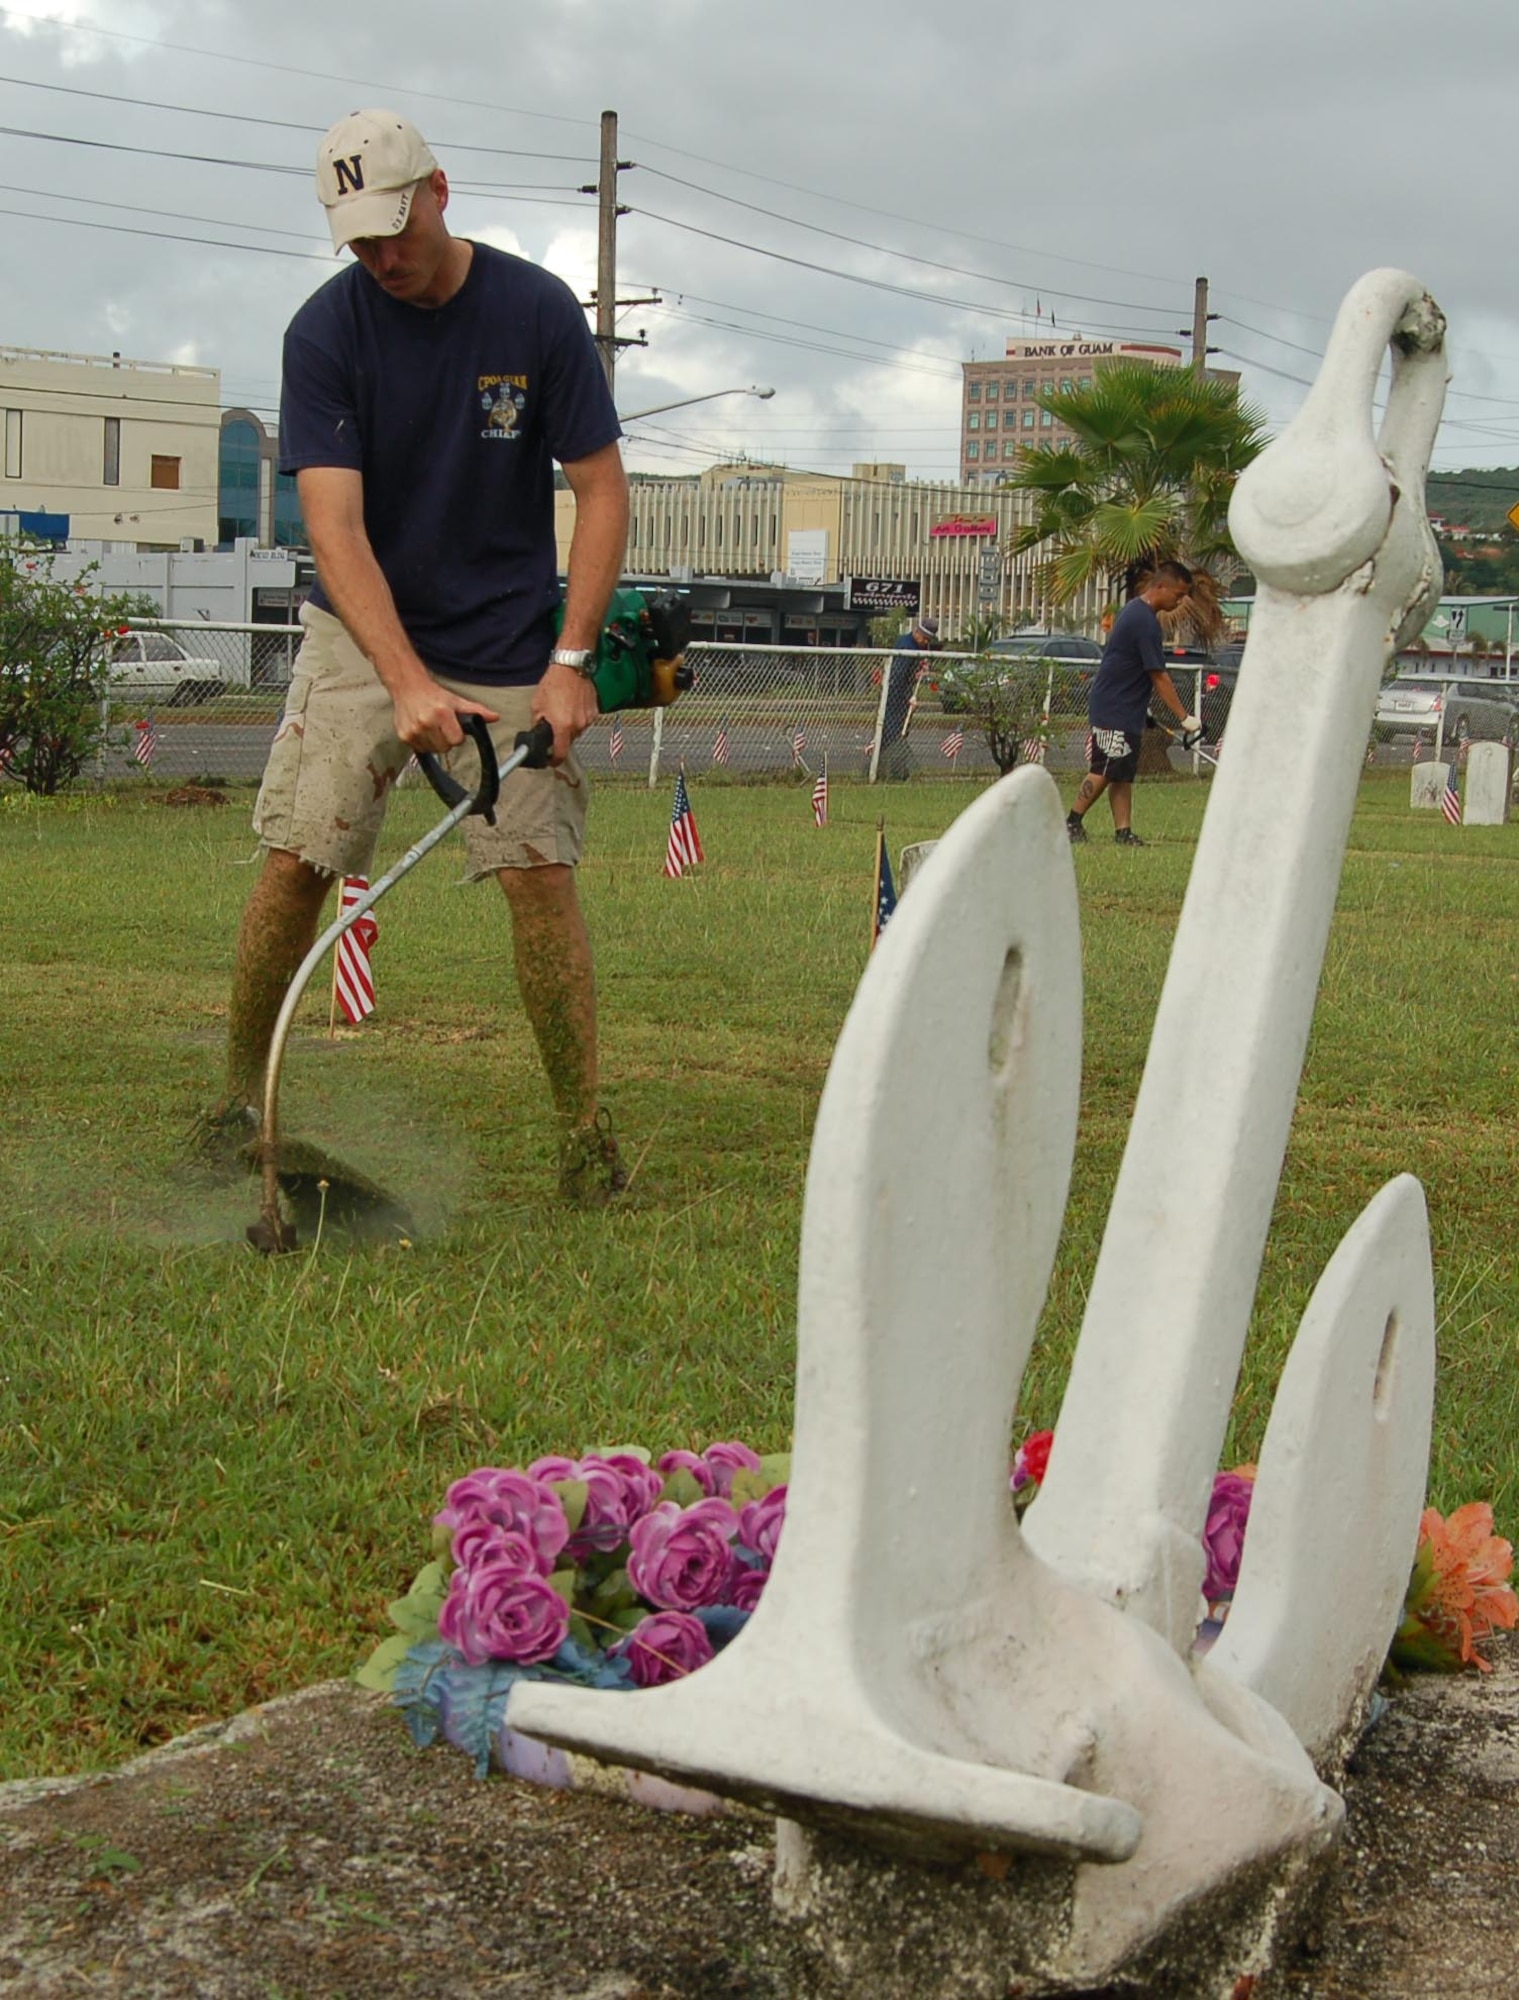 SKC Michael Callang trims the lawn near an anchor which stands in tribute to the sacrifices of the fallen Sailors and Marines who lay in rest at the Agana Cemetery. SKC Callang and several other Sailors from Helicopter Sea Combat Squadron-Two Five cared for the Agana Cemetary May 25 as their way of honoring the men and women buried there - their personal tribute to bring in the Memorial Day weekend.  (Photo by Tech. Sgt. Brian Bahret/36th Wing Public Affairs)